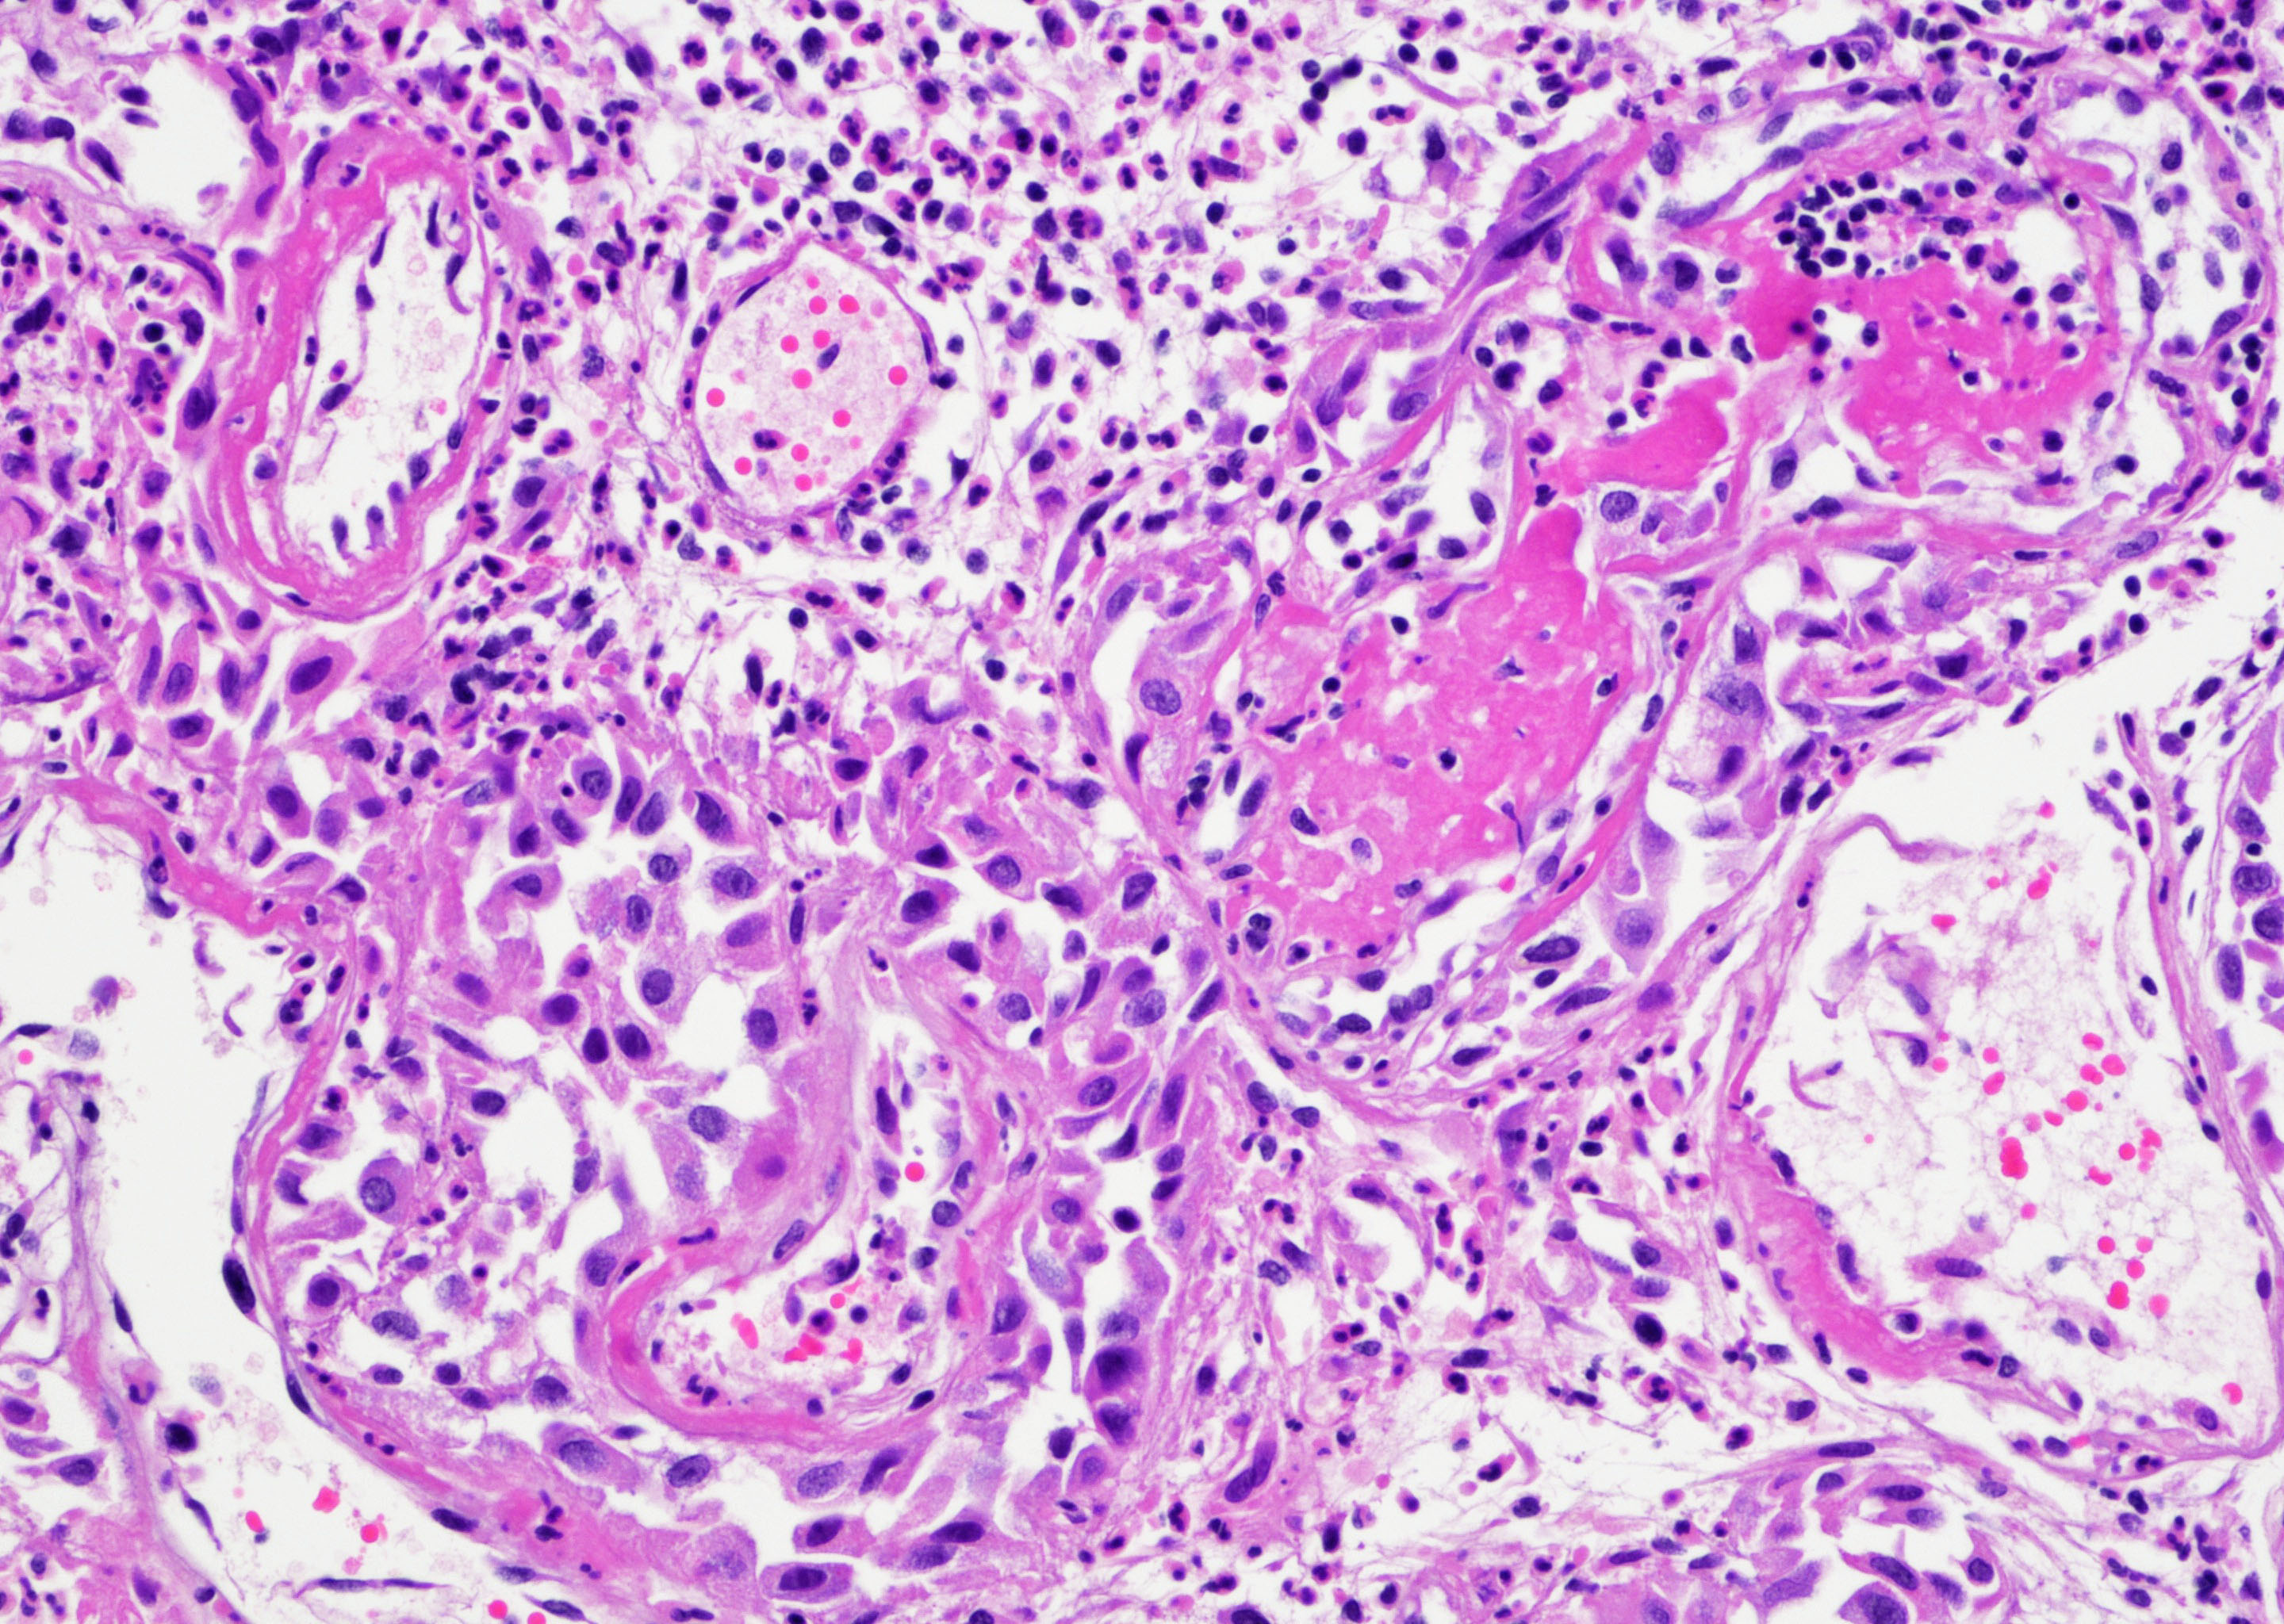 Atypical urothelial proliferation